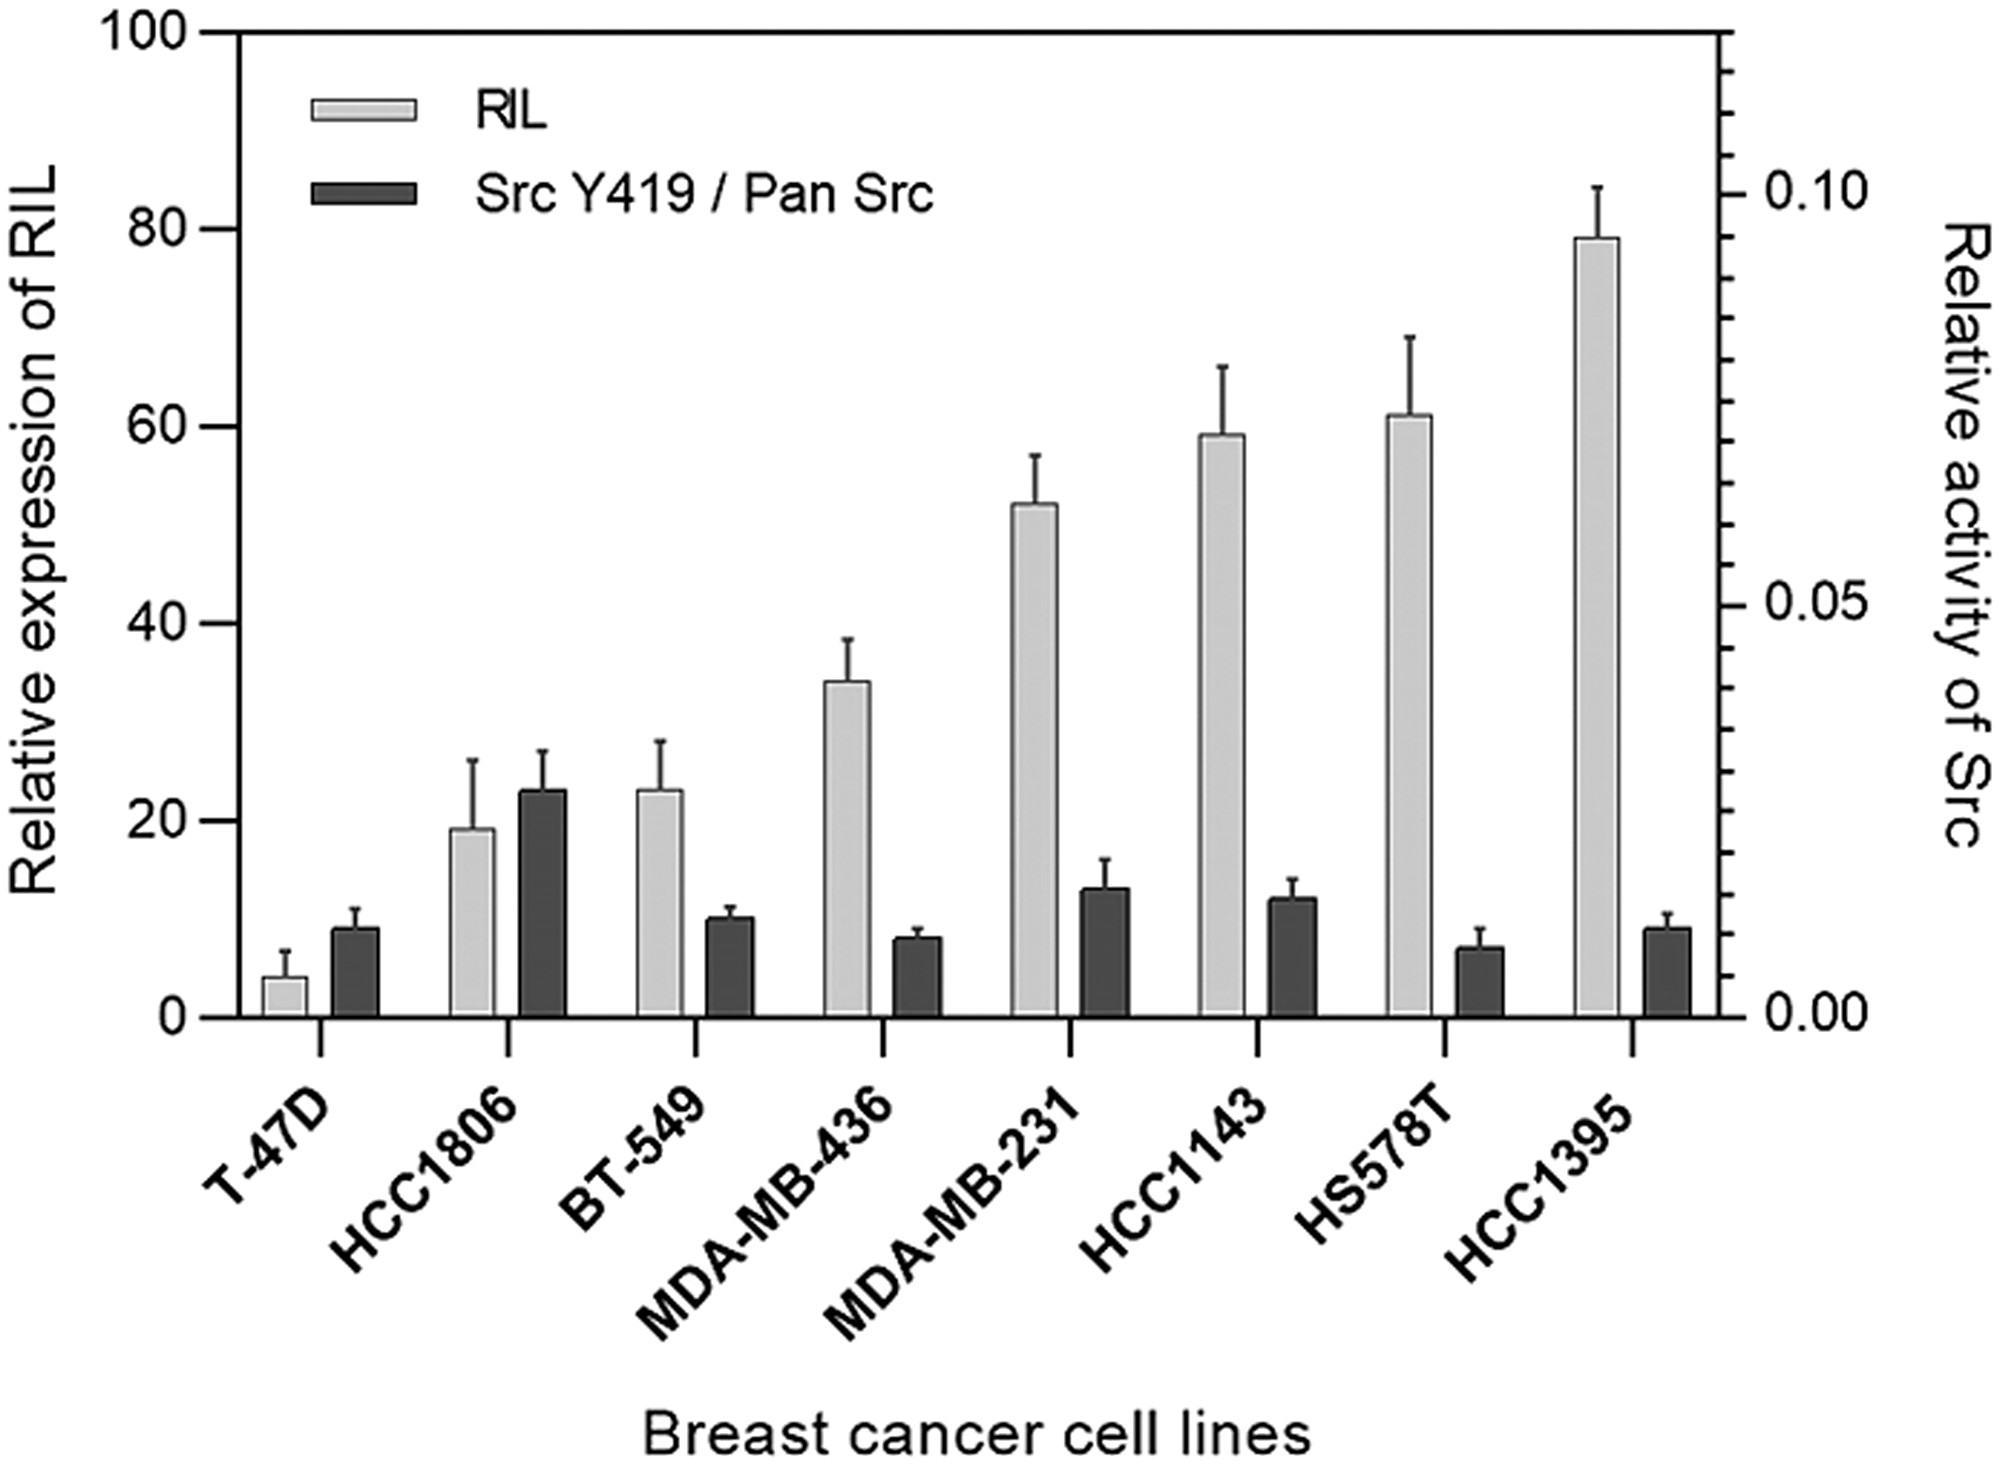 Expression of RIL compared to the activity of Src in breast cancer cell lines; the light bars correspond to the relative expression level of RIL determined by RT-PCR; the dark columns reflect the proportion of active Src (Y419) relative to total Src protein level in the corresponding cells; bars represent standard deviation of the mean.